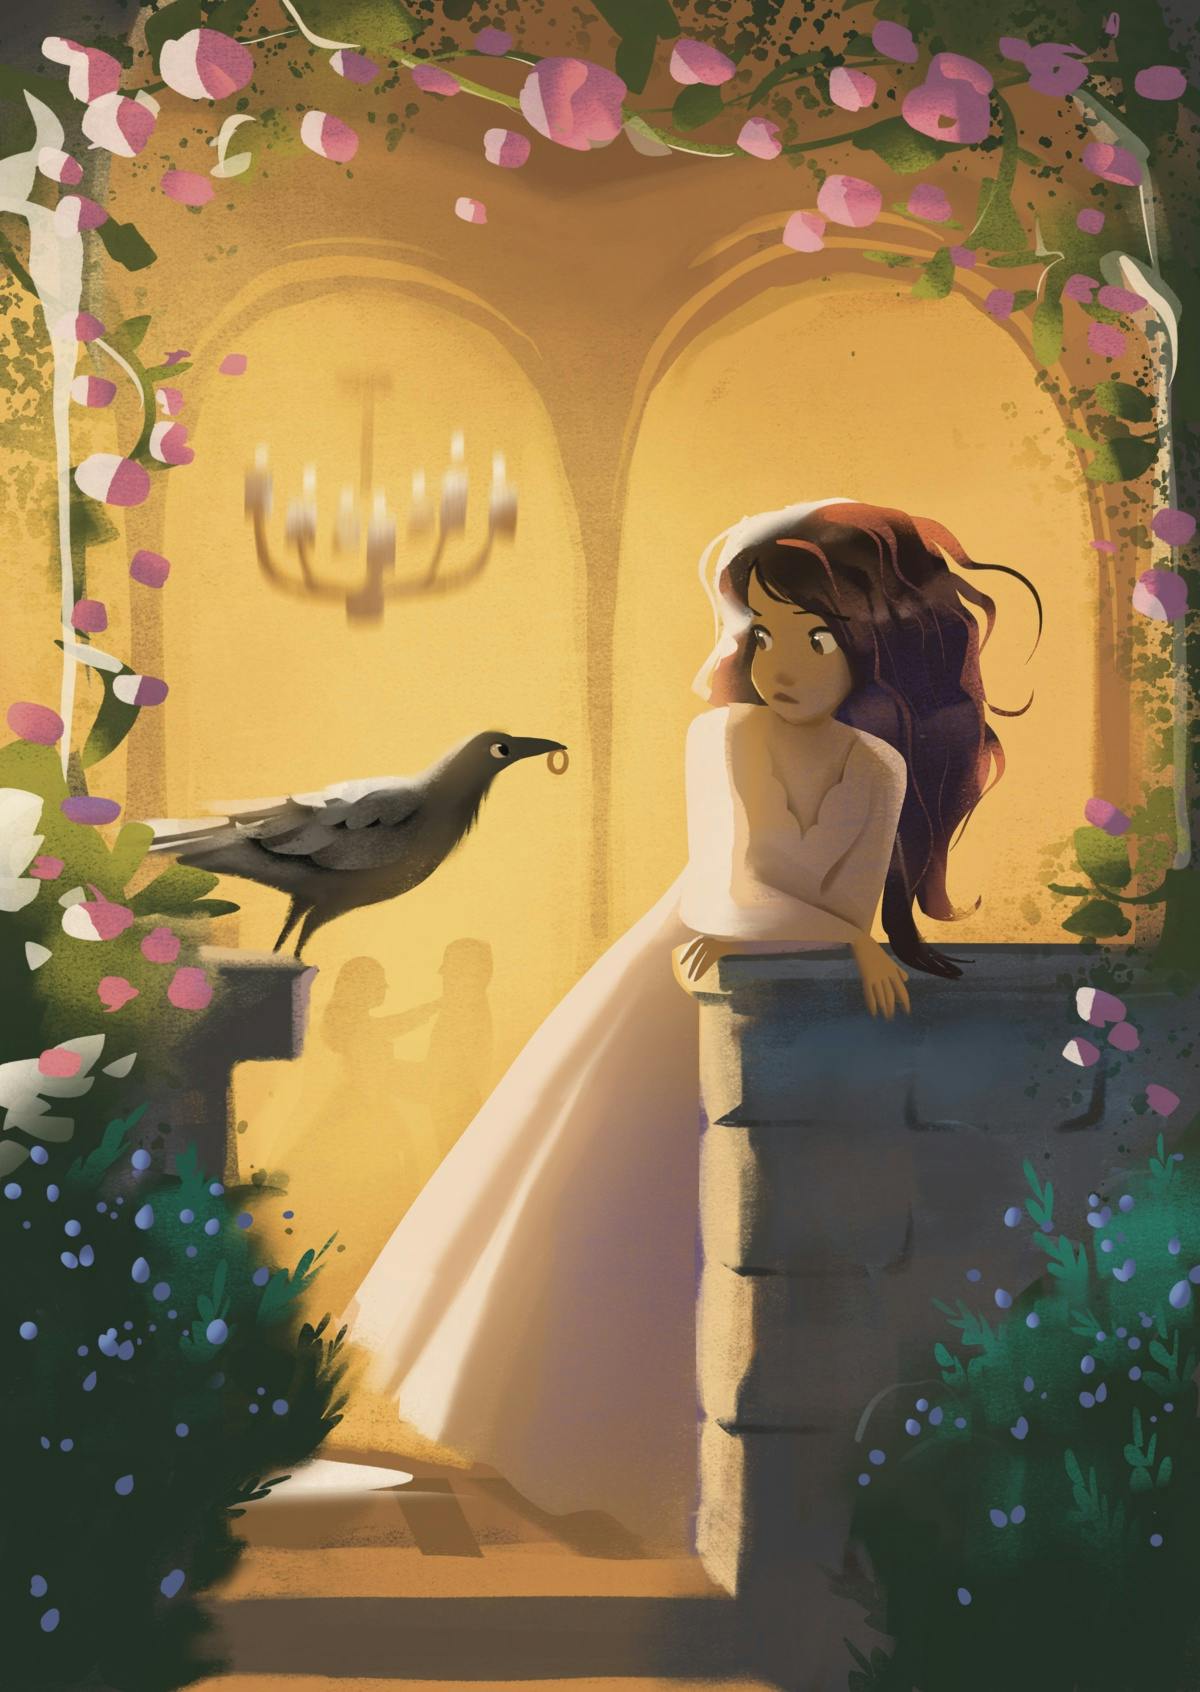 A crow giving a ring to a woman